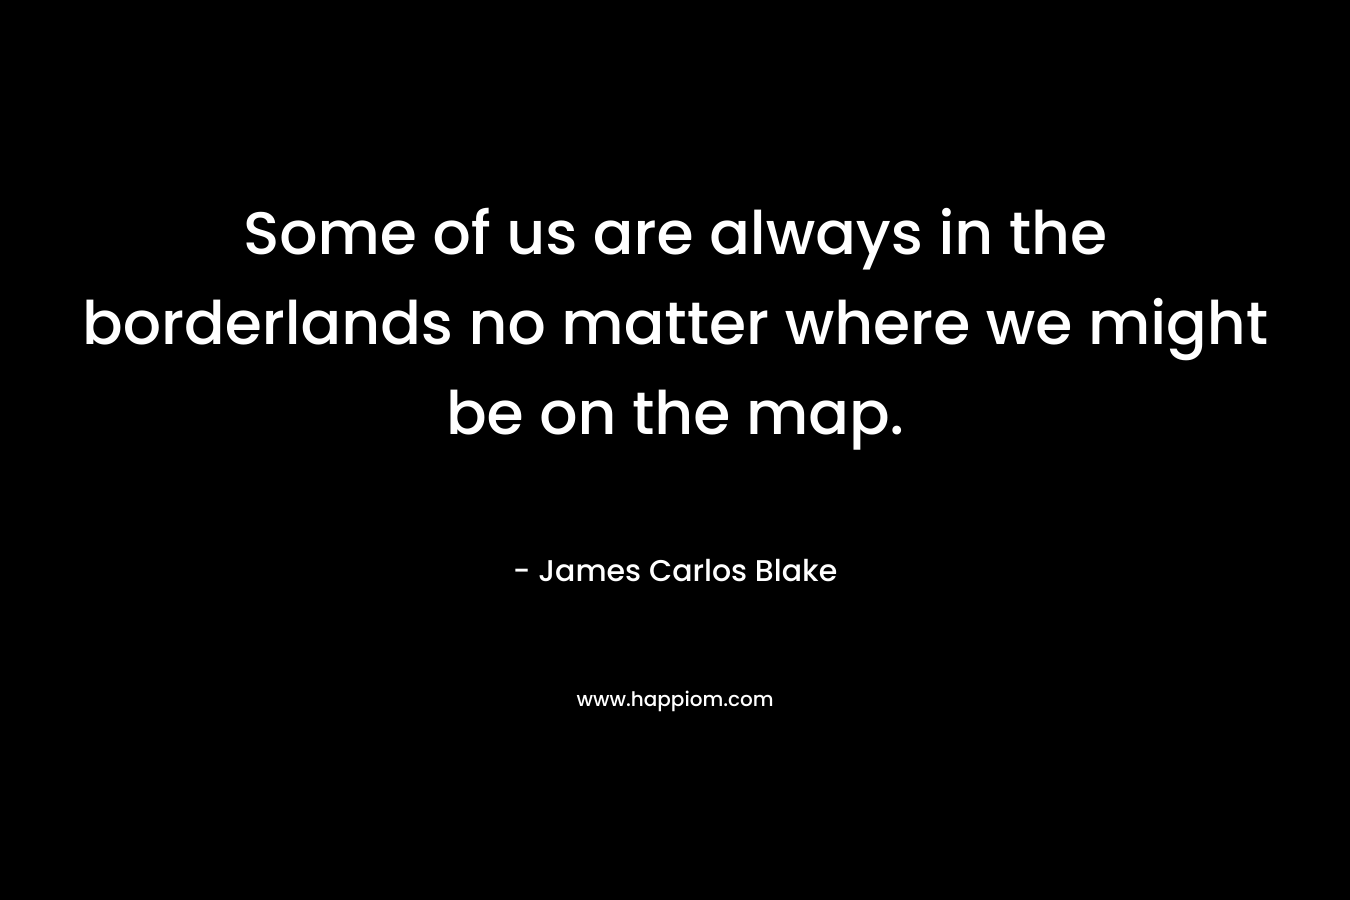 Some of us are always in the borderlands no matter where we might be on the map. – James Carlos Blake